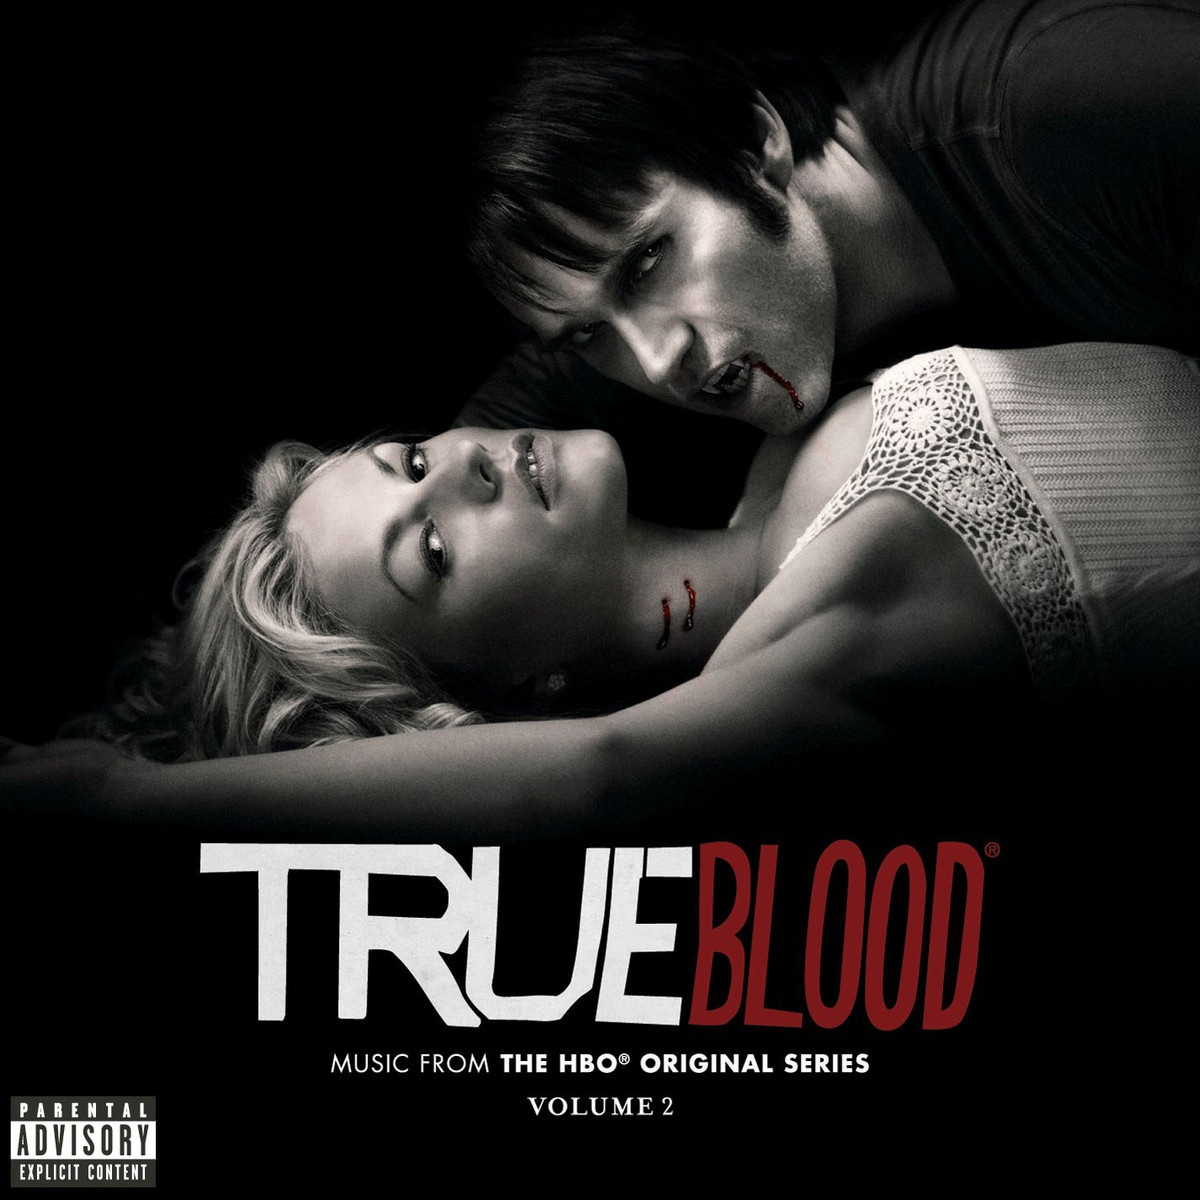 True Blood (Music from the HBO Original Series)